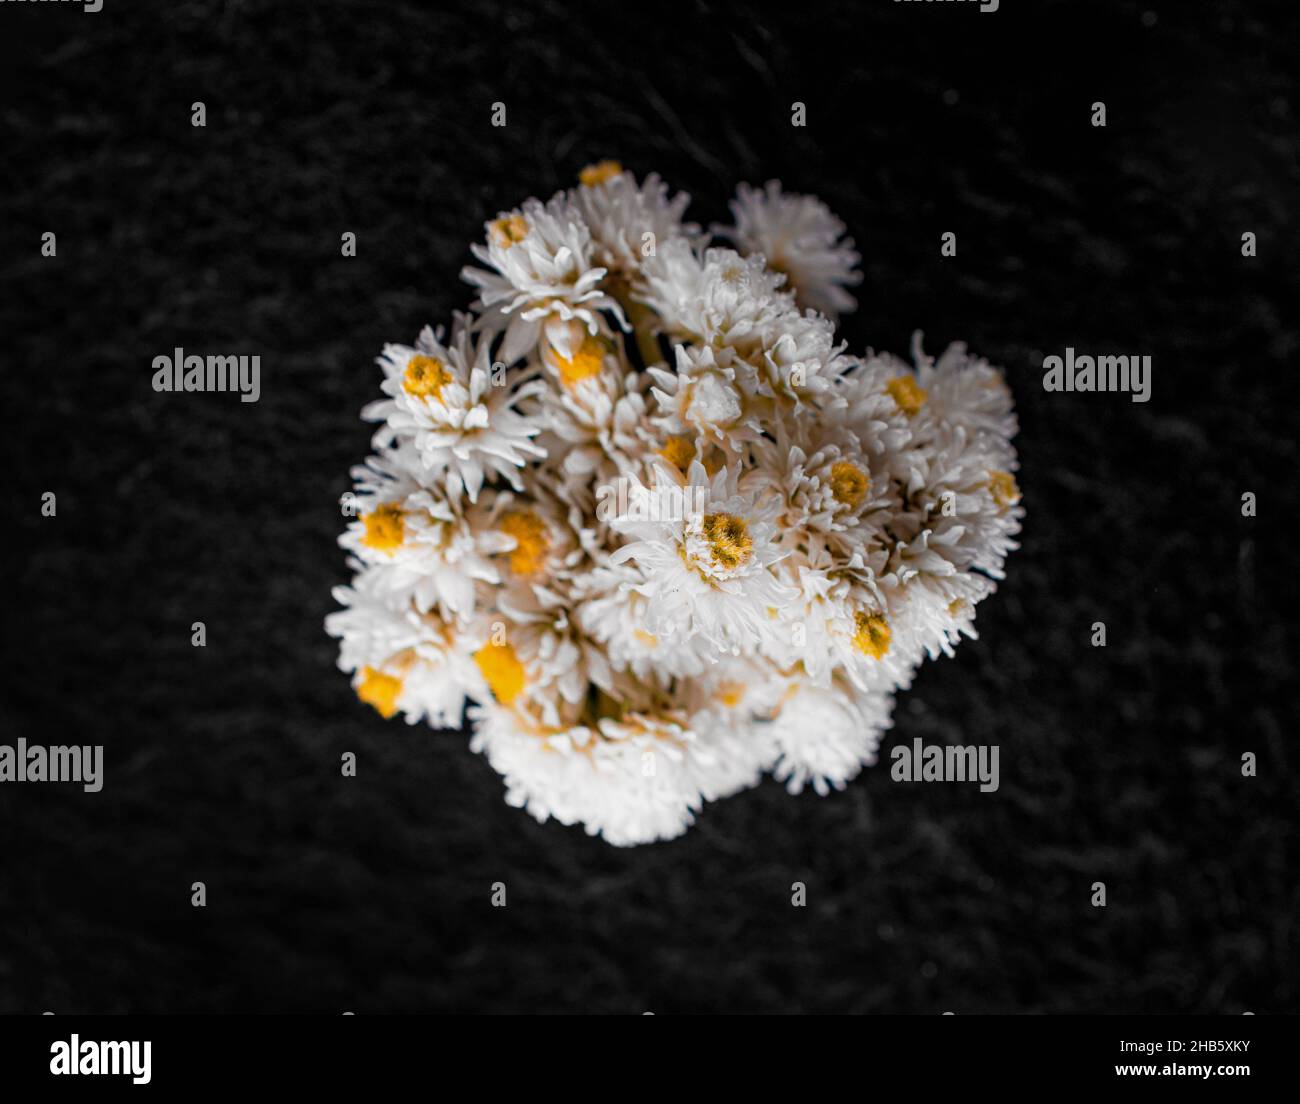 Top view of a flower on a black background. Closeup. Nature. Stock Photo